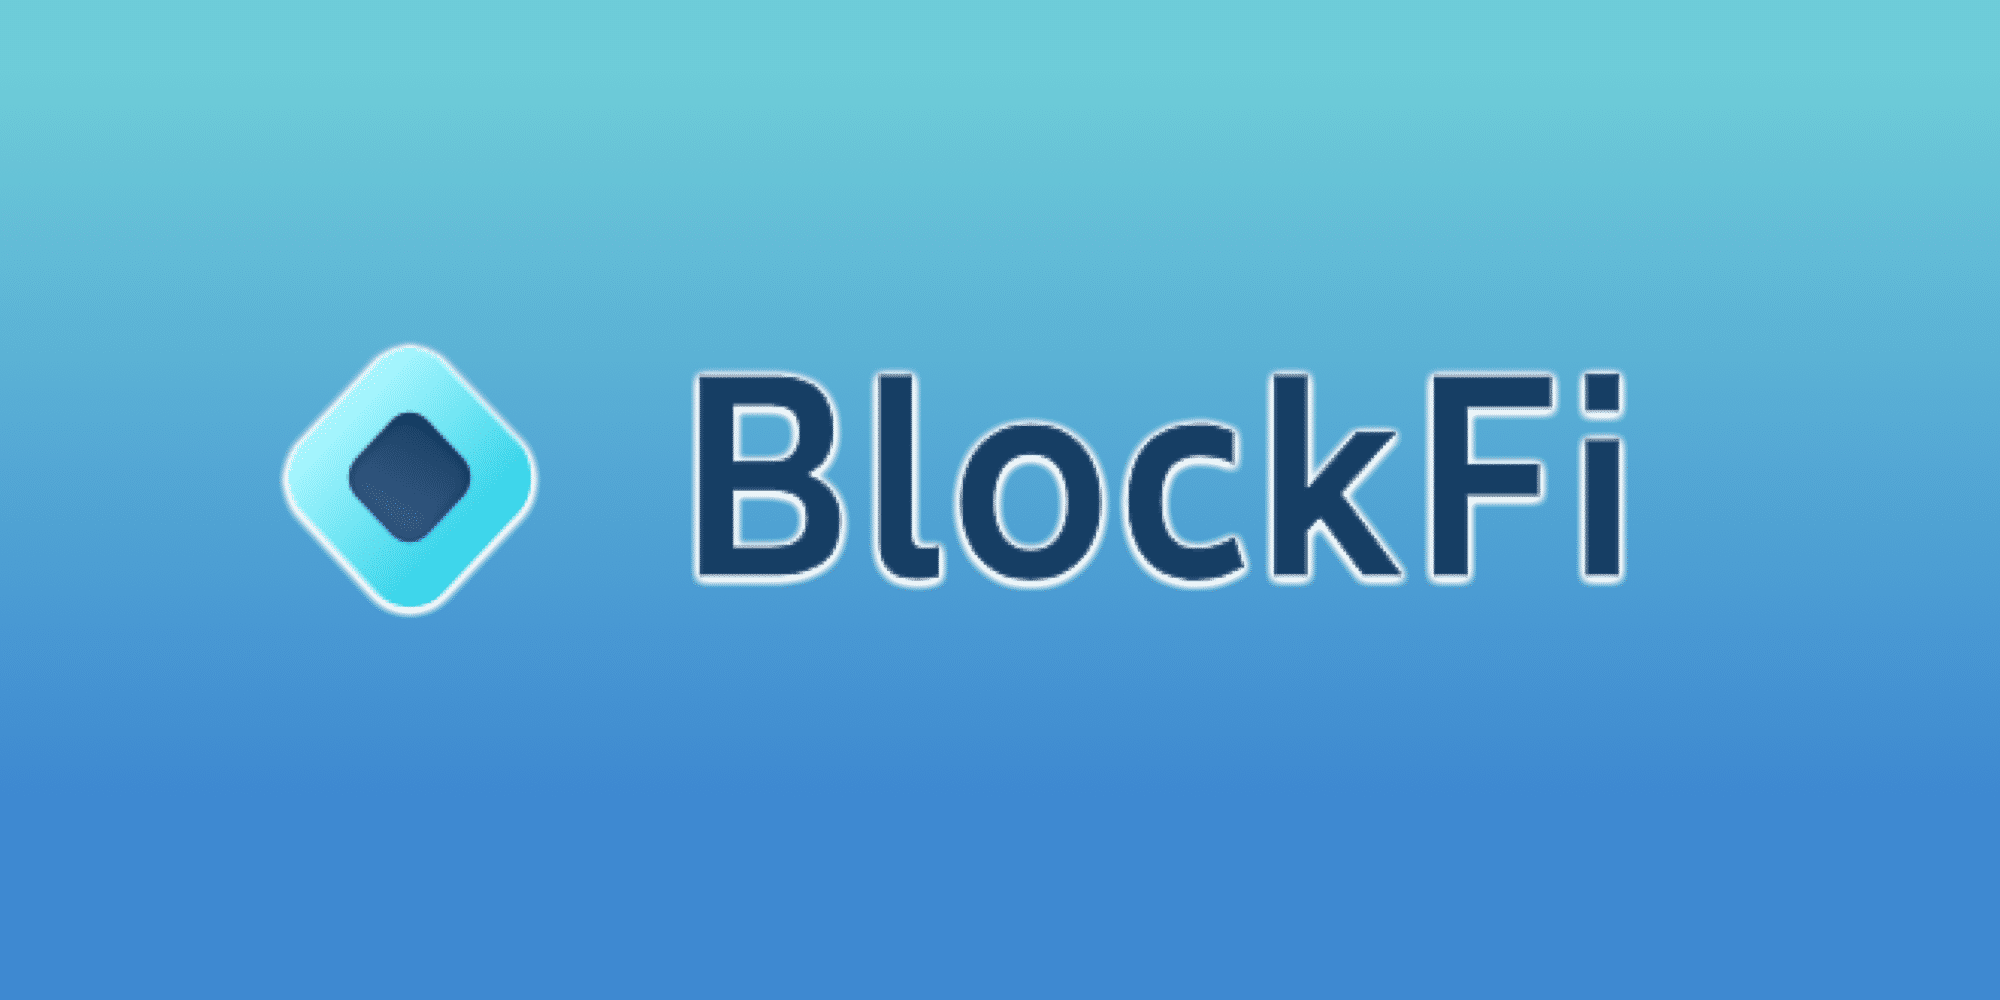 BlockFi Review: Is BlockFi Safe, Legit, and Worth Your Time? [Updated 2022]